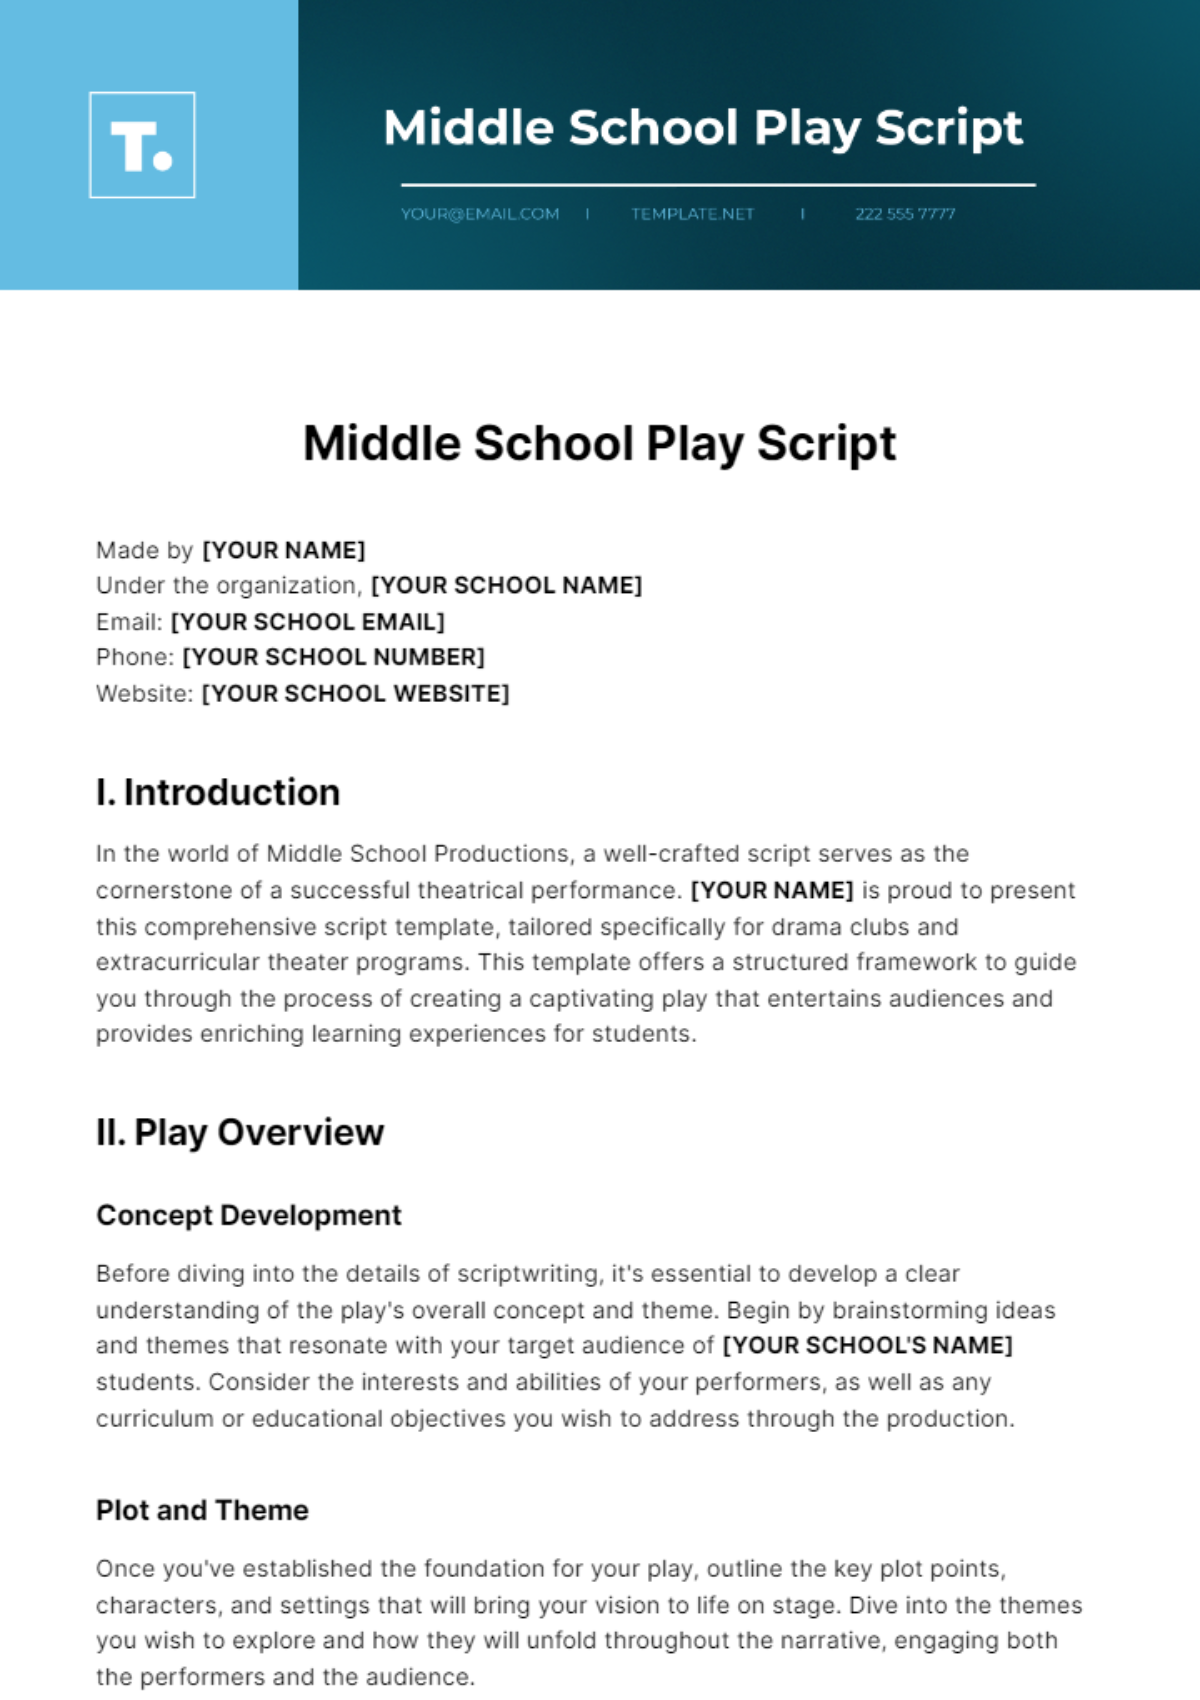 Middle School Play Script Template